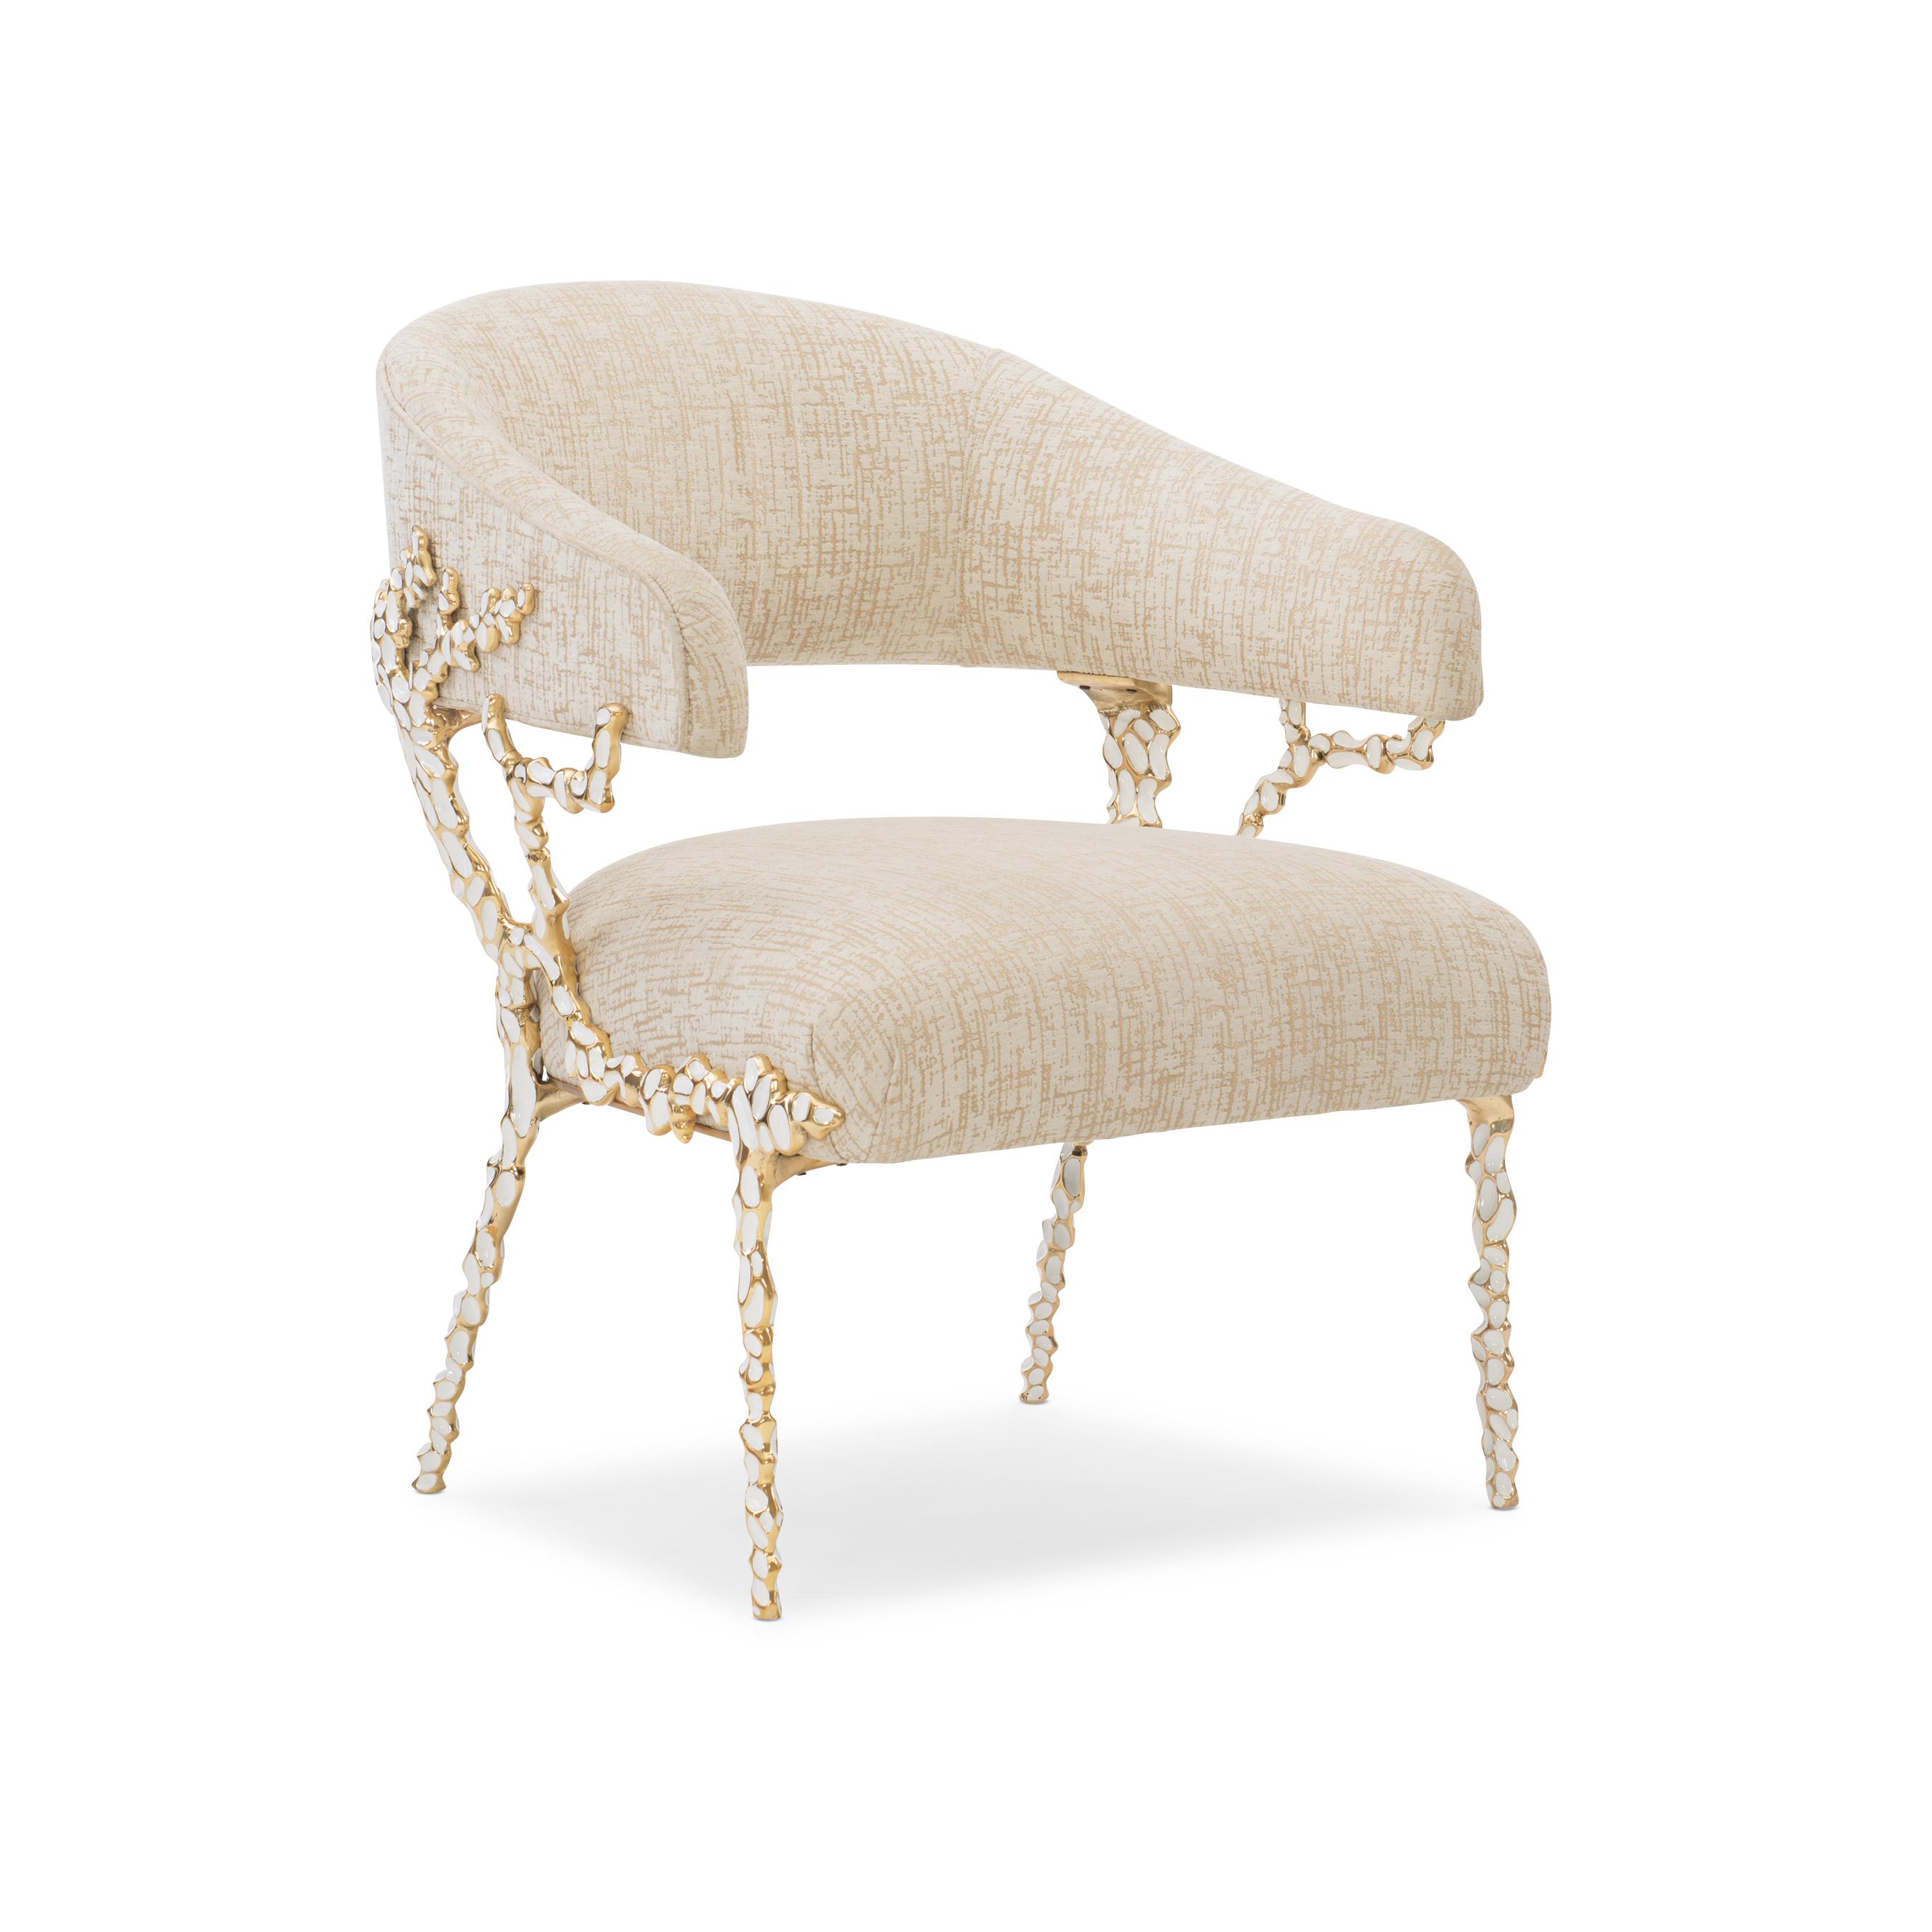 Modern Accent Chair Glimmer Of Hope UPH-419-231-A in Gold, Beige Fabric